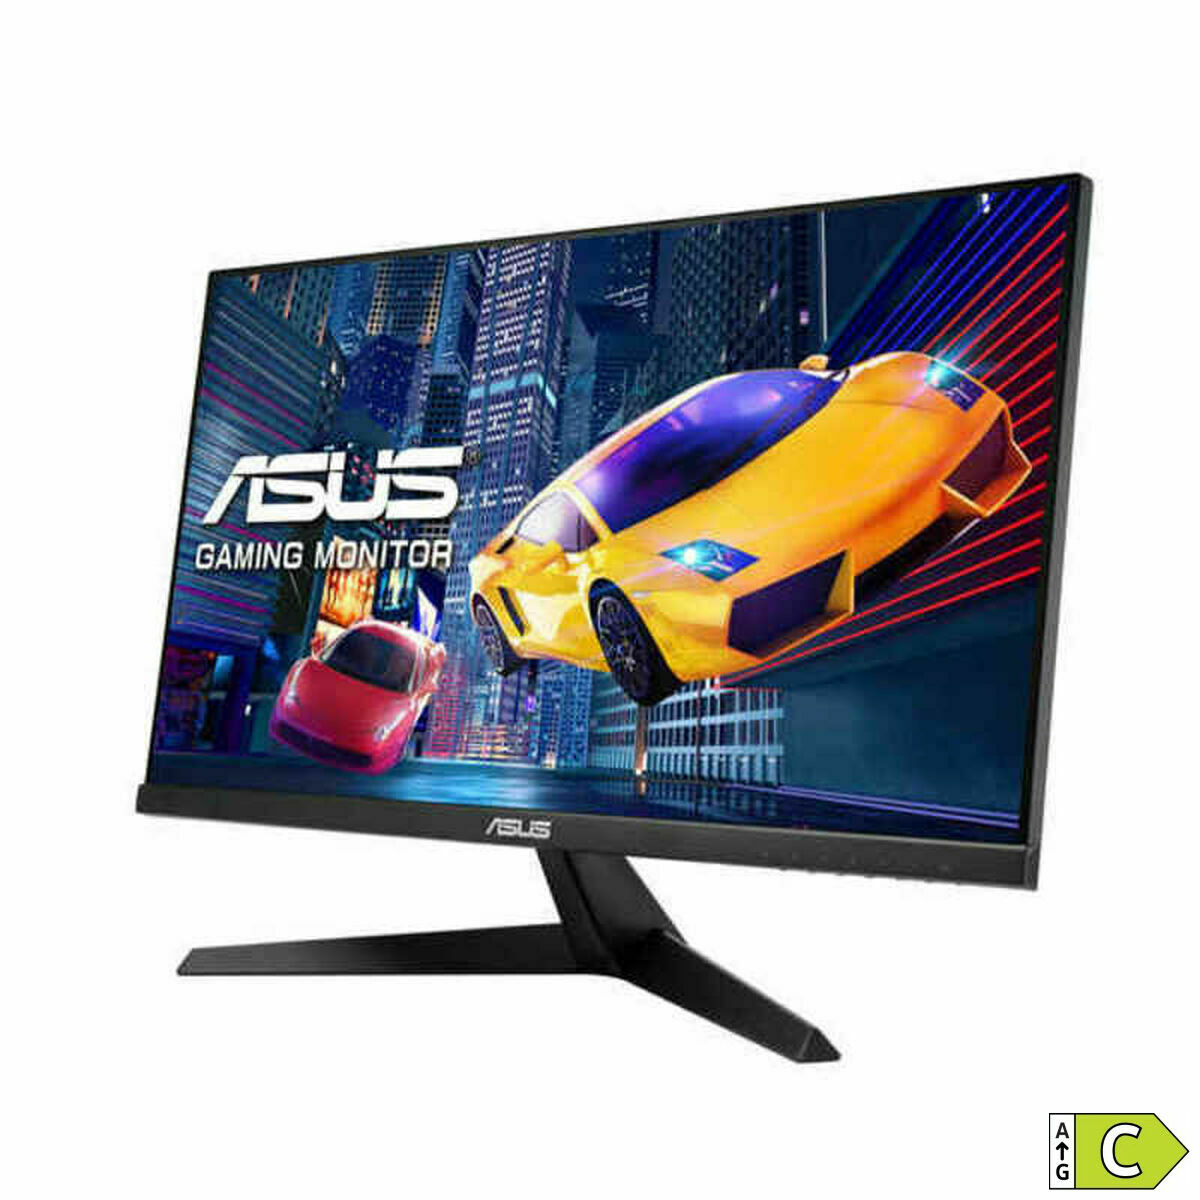 Monitor Asus VY249HE 23,8